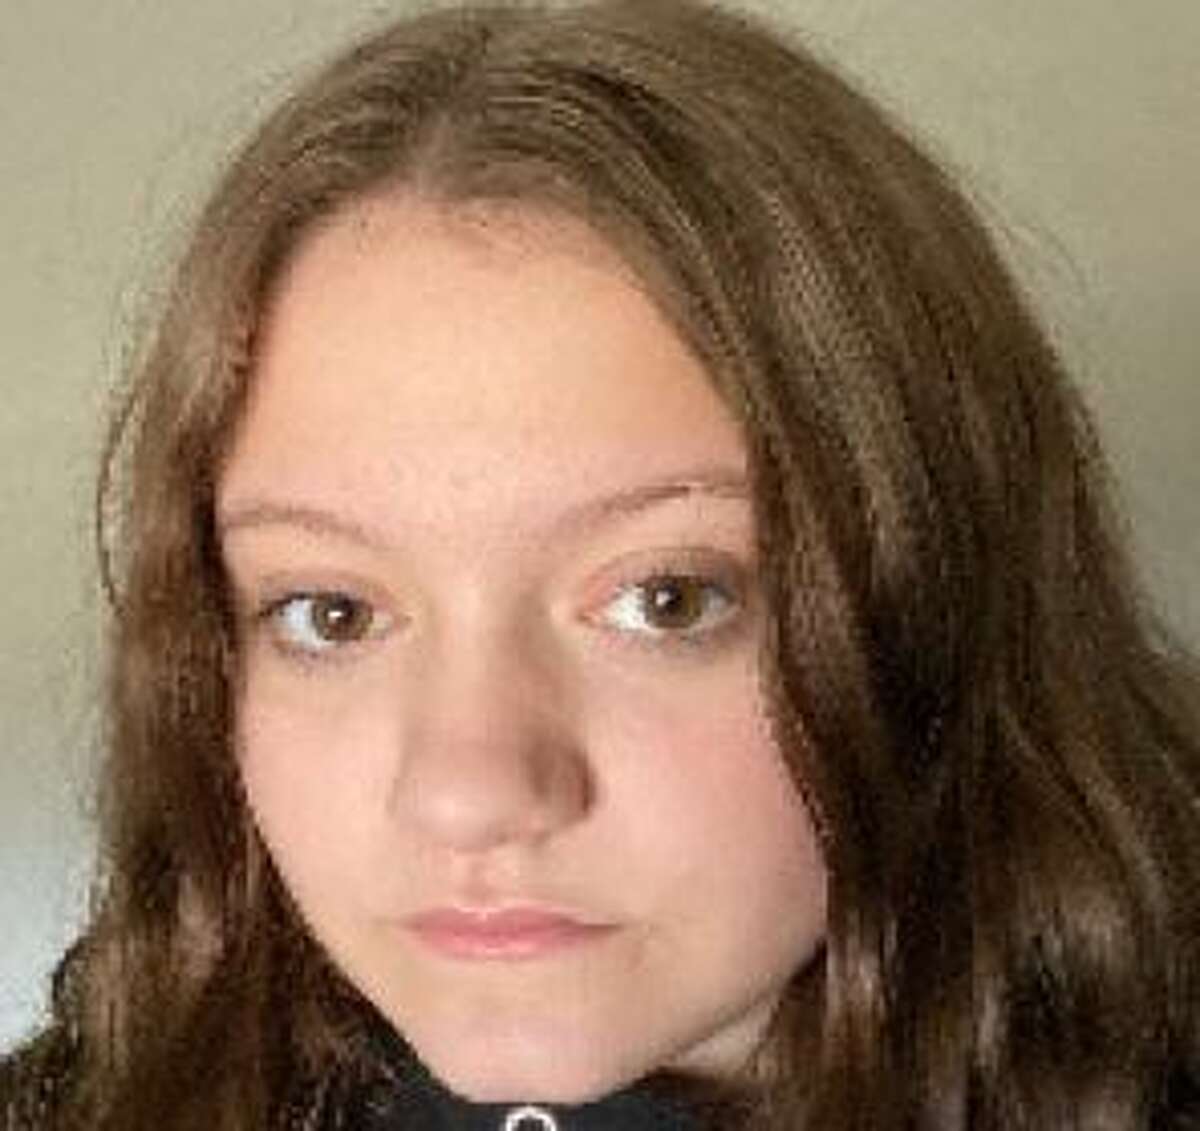 Amber Alert issued for 14-year-old girl in Fairview.